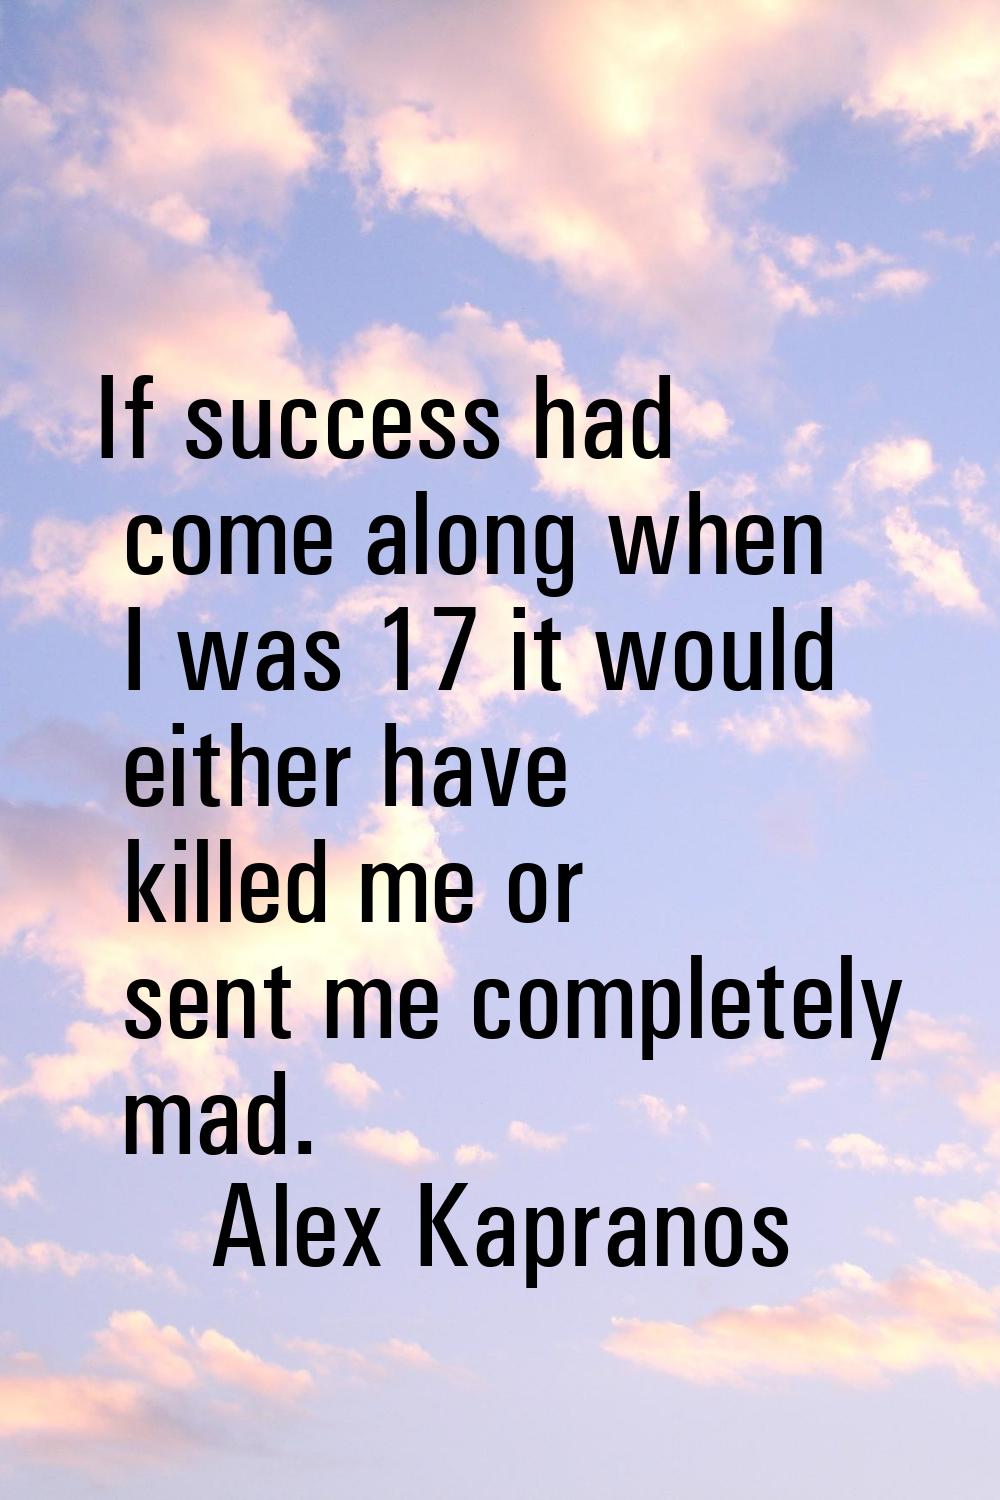 If success had come along when I was 17 it would either have killed me or sent me completely mad.